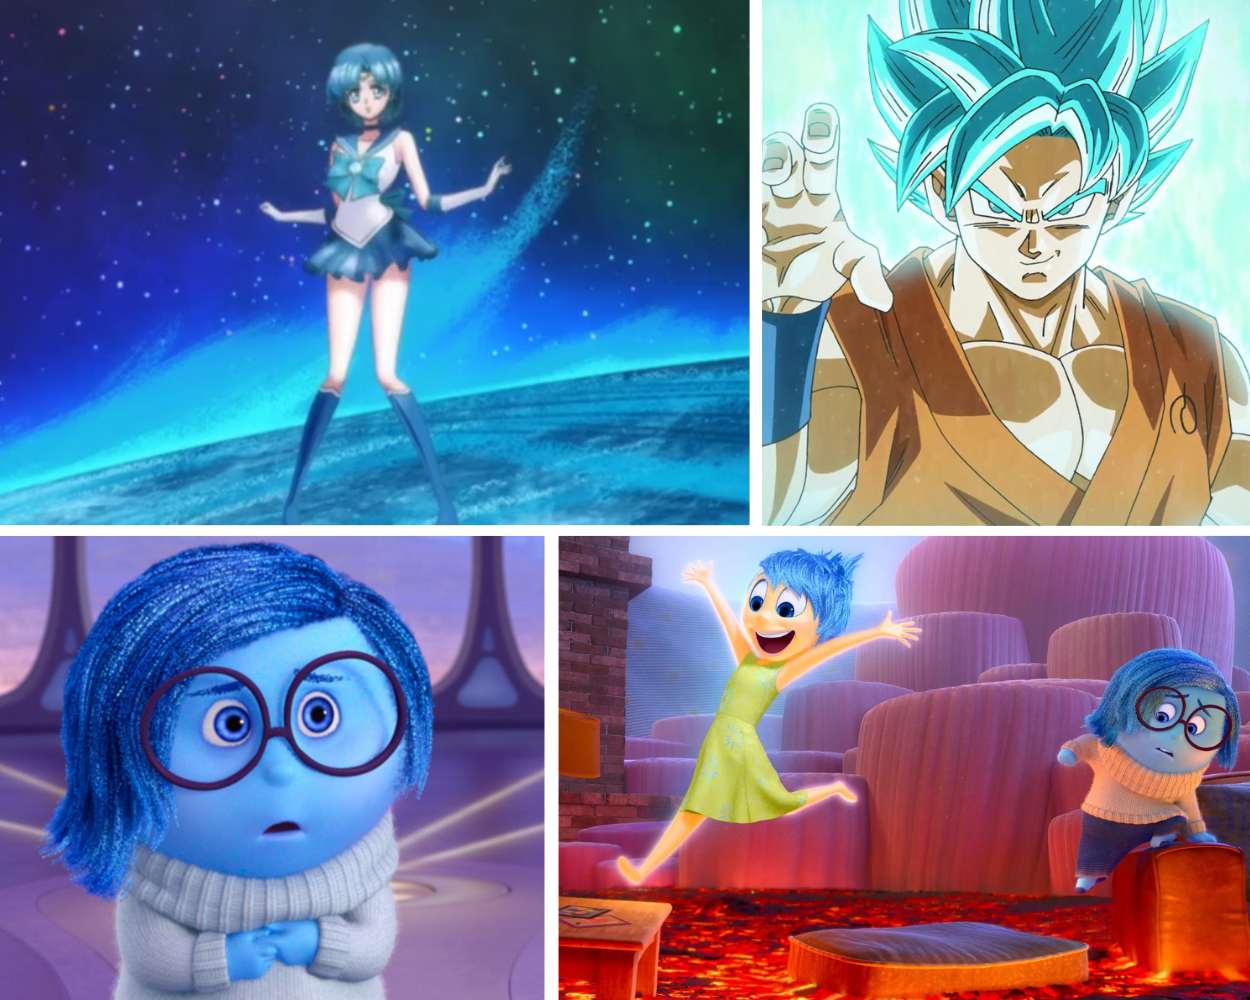 anime characters with blue hair